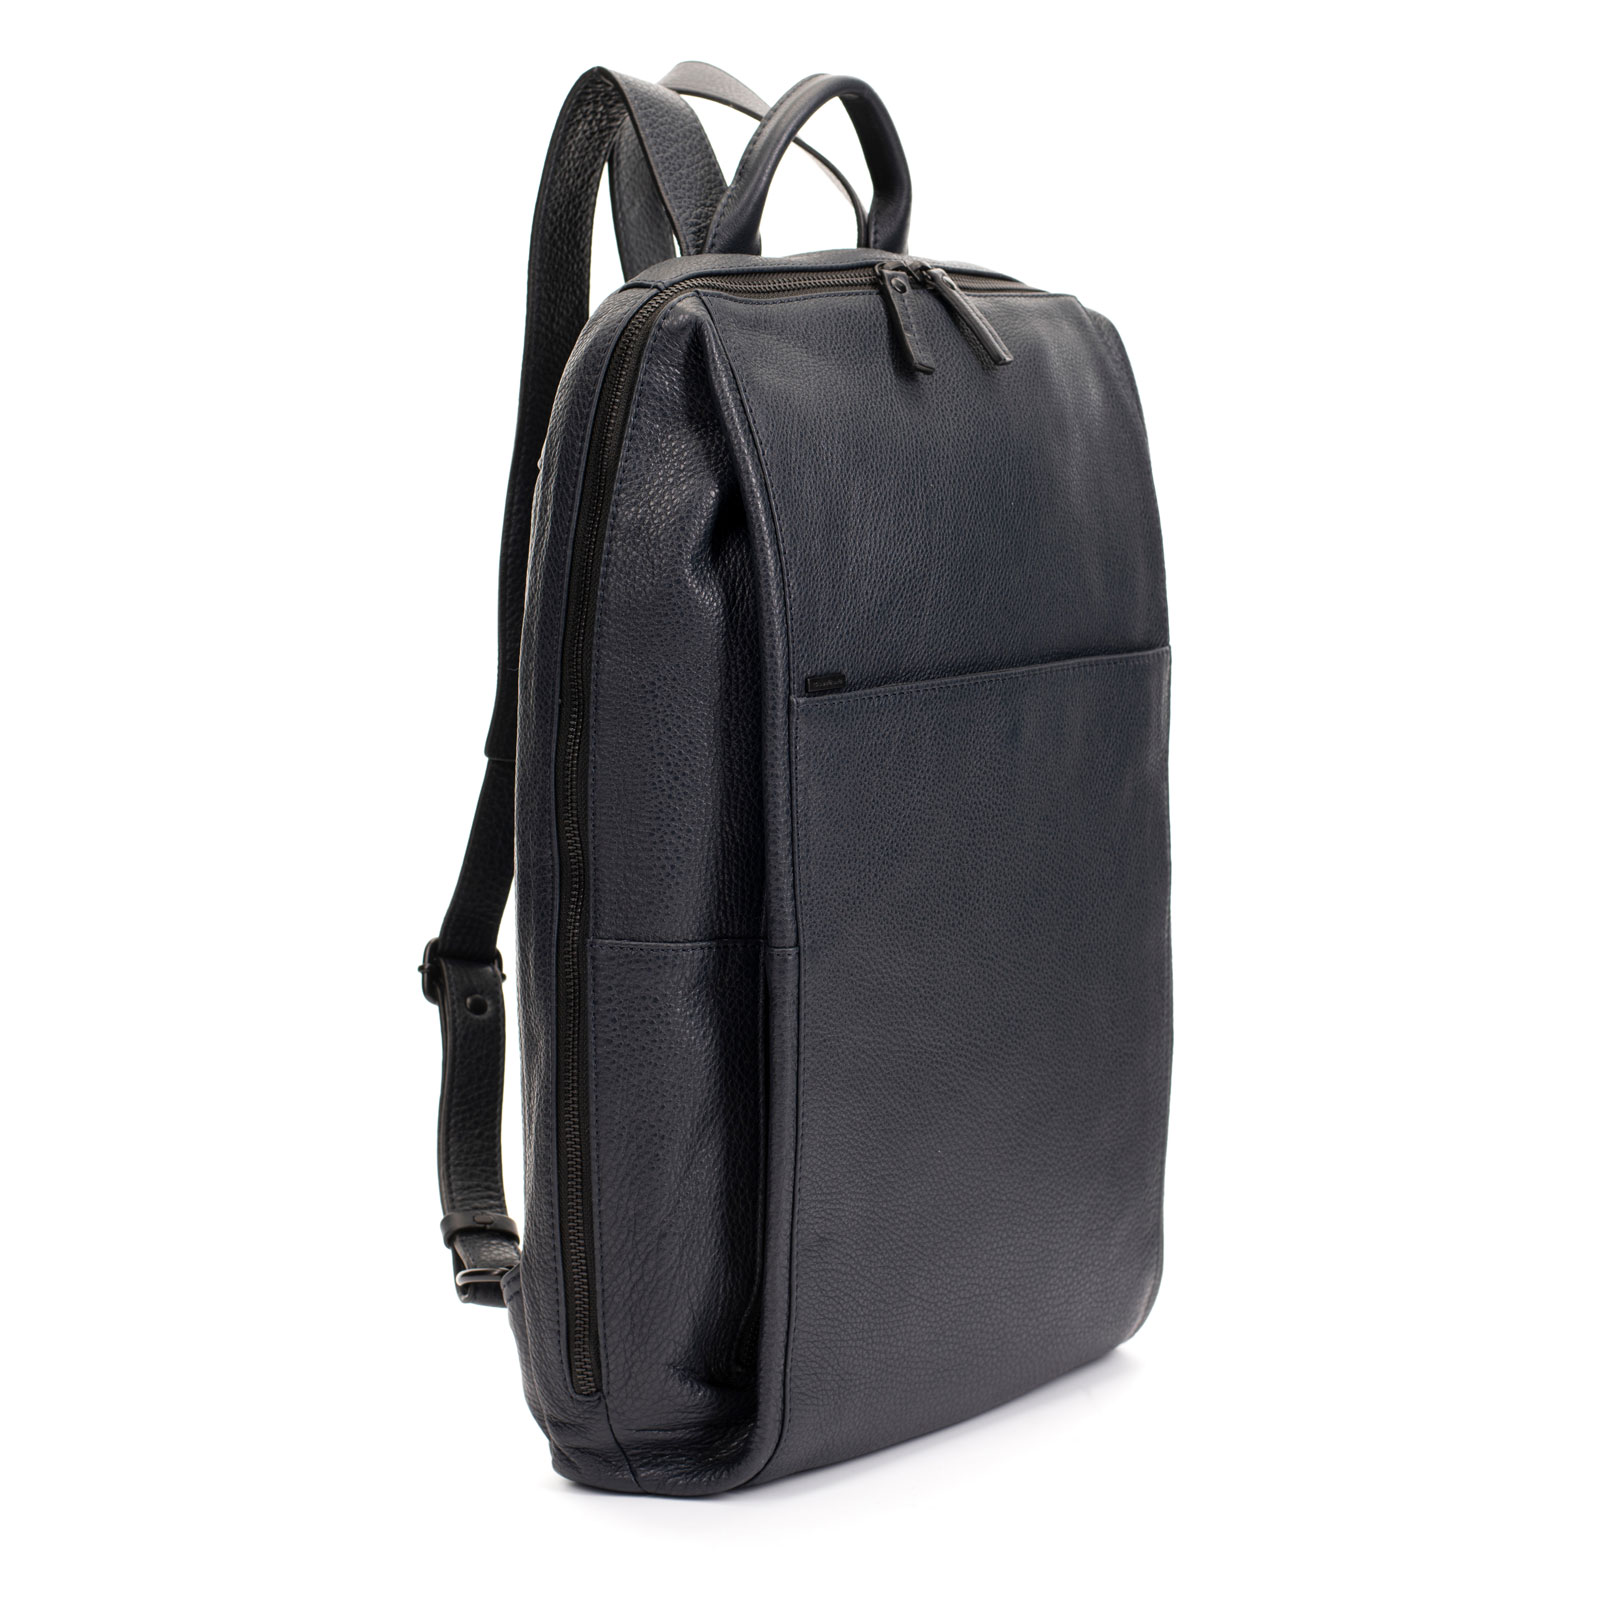 ARES BACKPACK — Gianni Conti